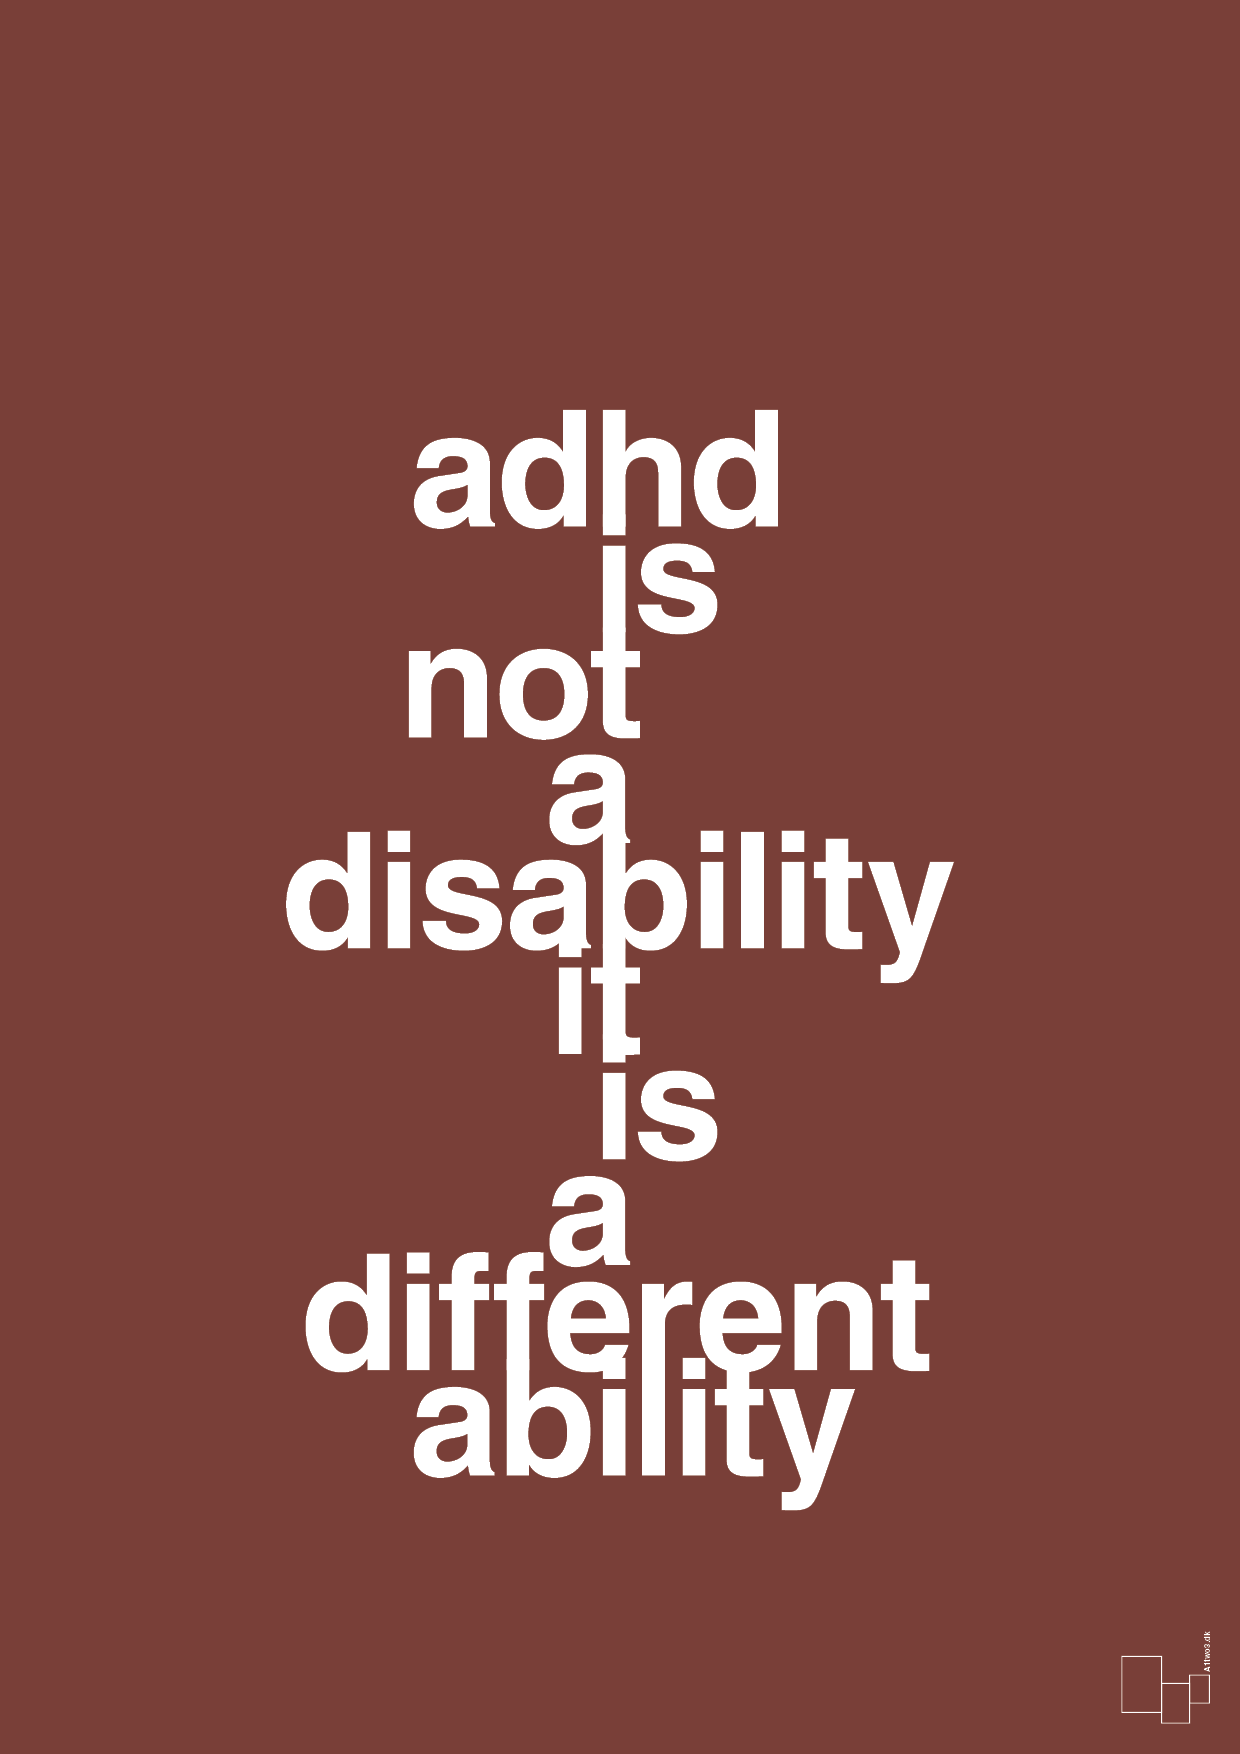 adhd is not a disability it is a different ability - Plakat med Samfund i Red Pepper